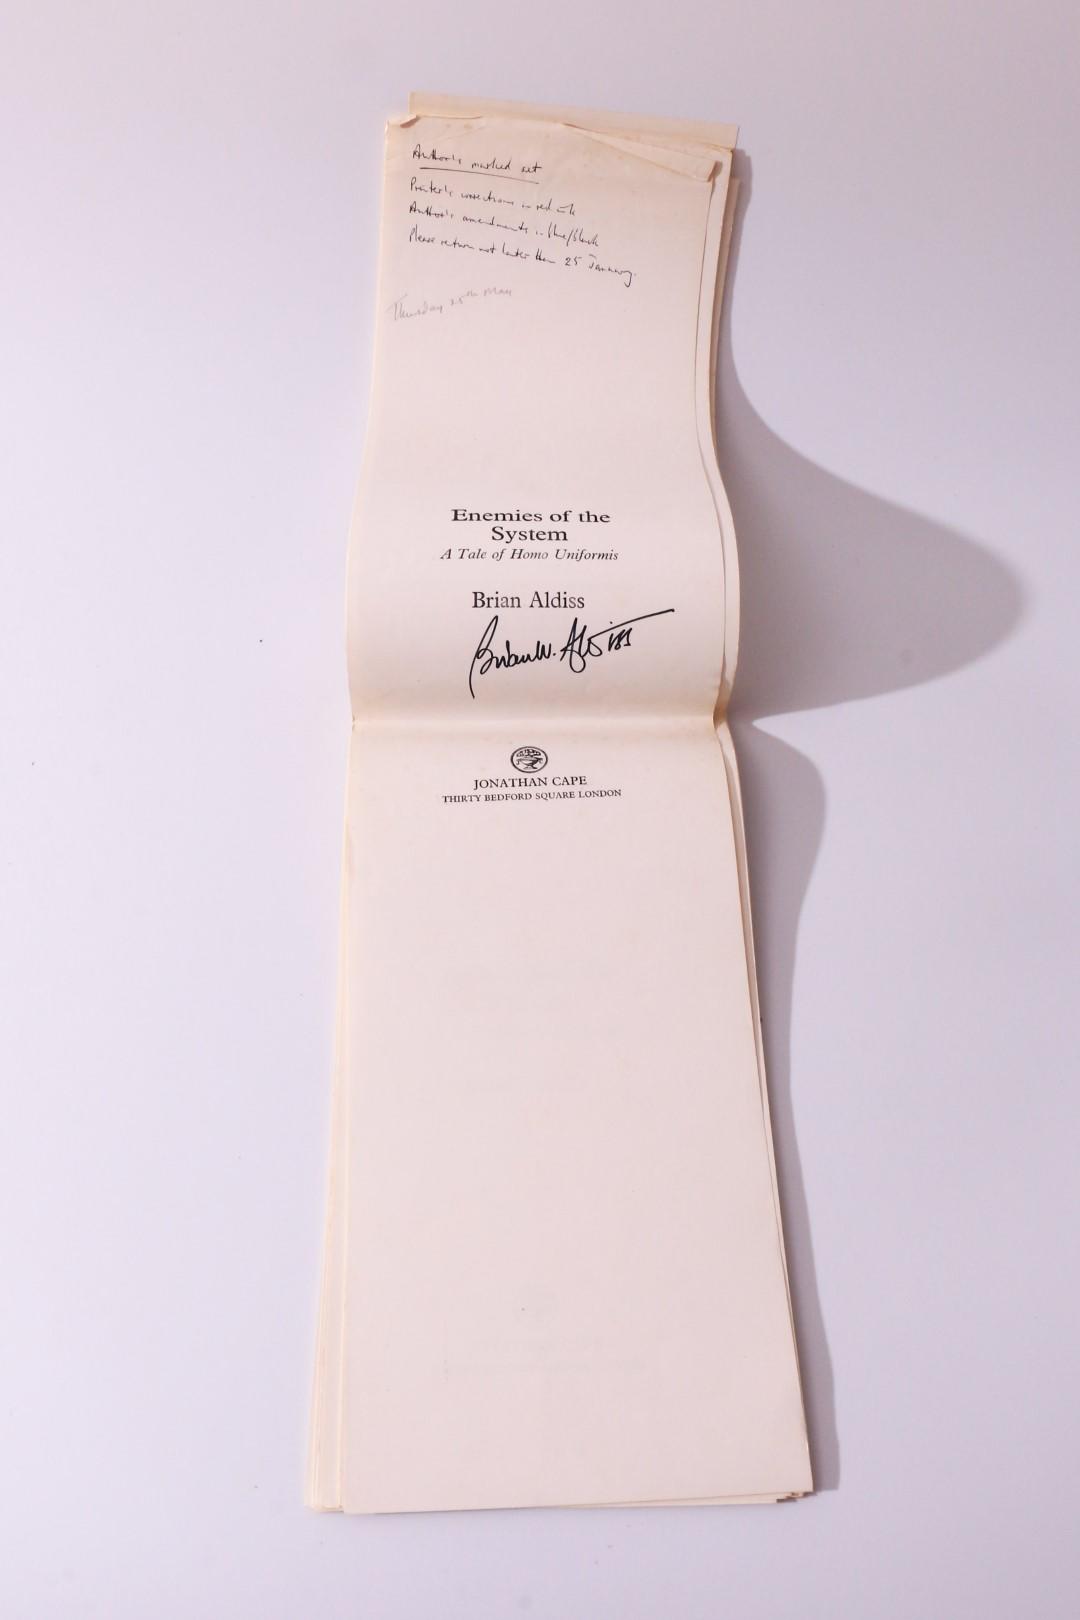 Brian Aldiss - Enemies of the System: A Tale of Homo Uniformis - Jonathan Cape, 1978, Proof. Signed